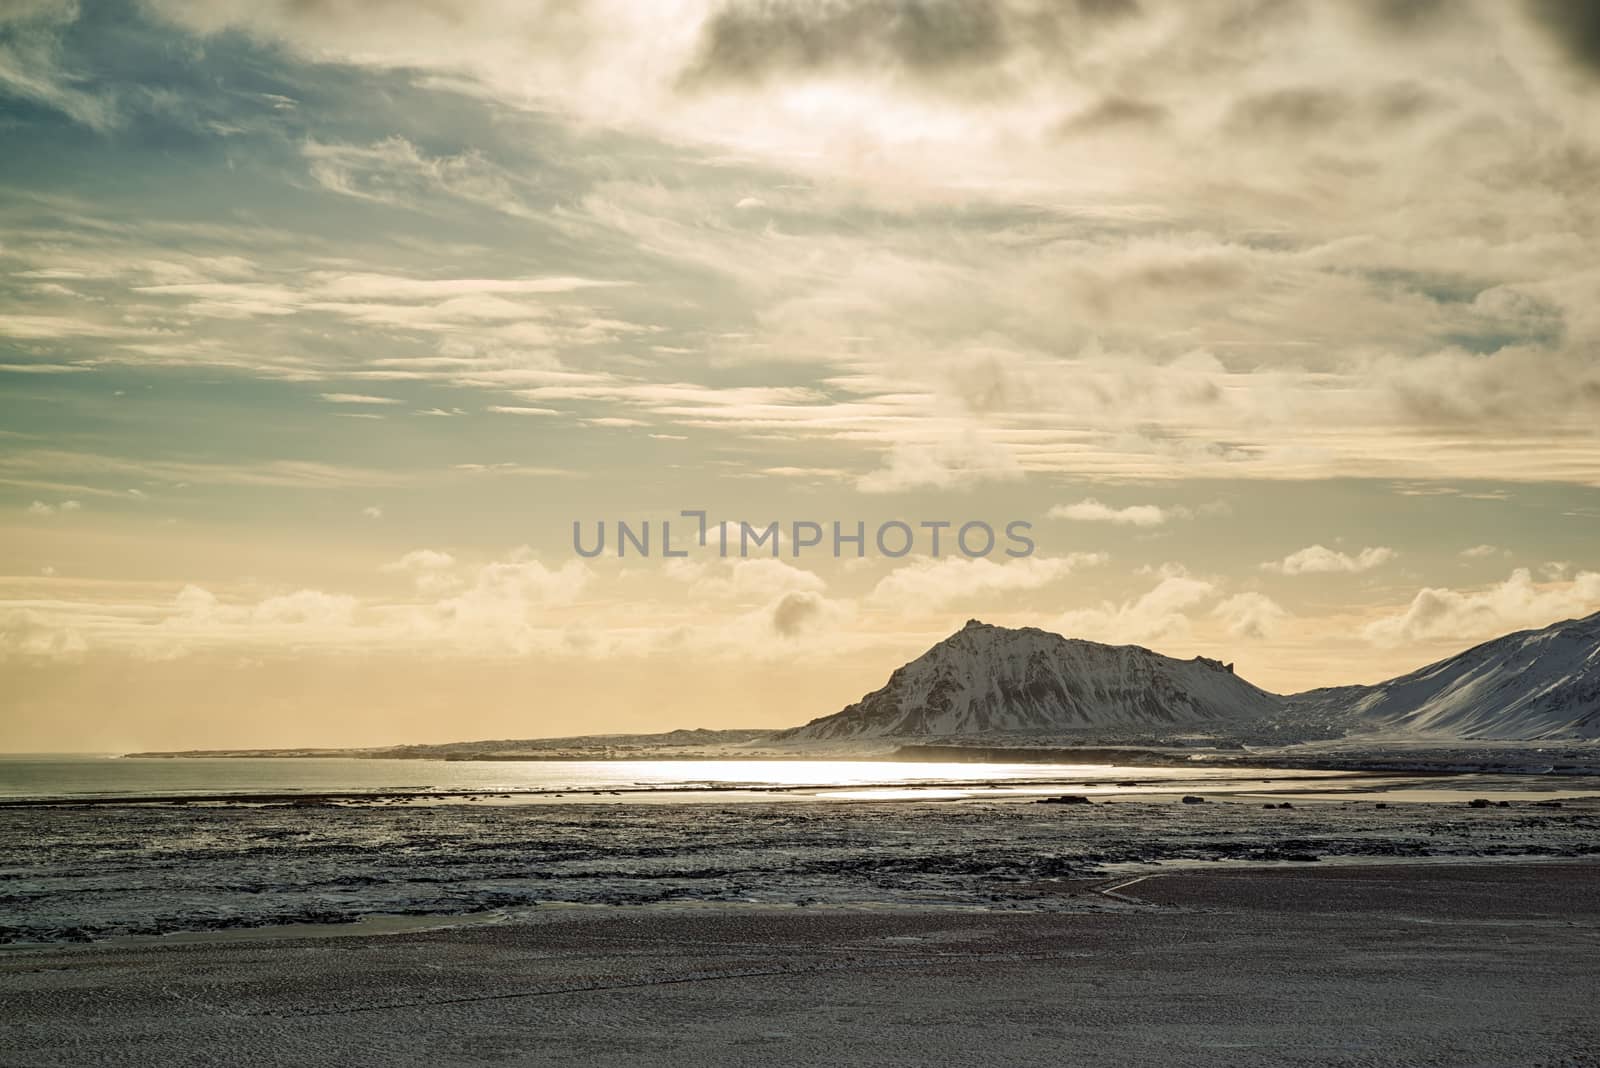 Mountains in Snaefellsnes peninsula with the sun reflected in the water, Iceland